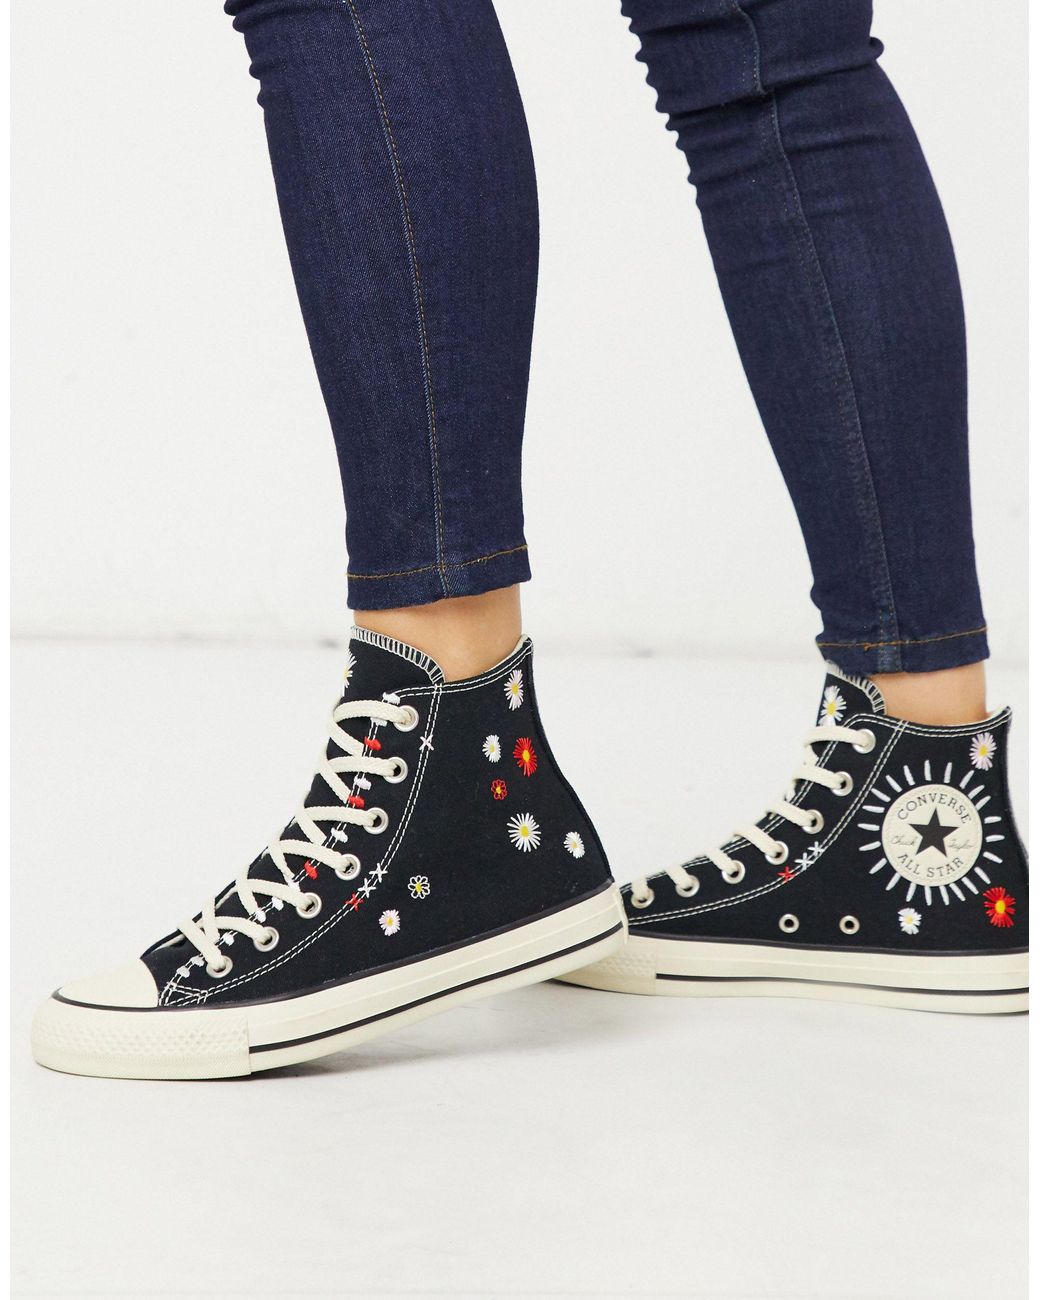 Converse Chuck Taylor All Star Hi Black Embroidered Floral Sneakers | Lyst